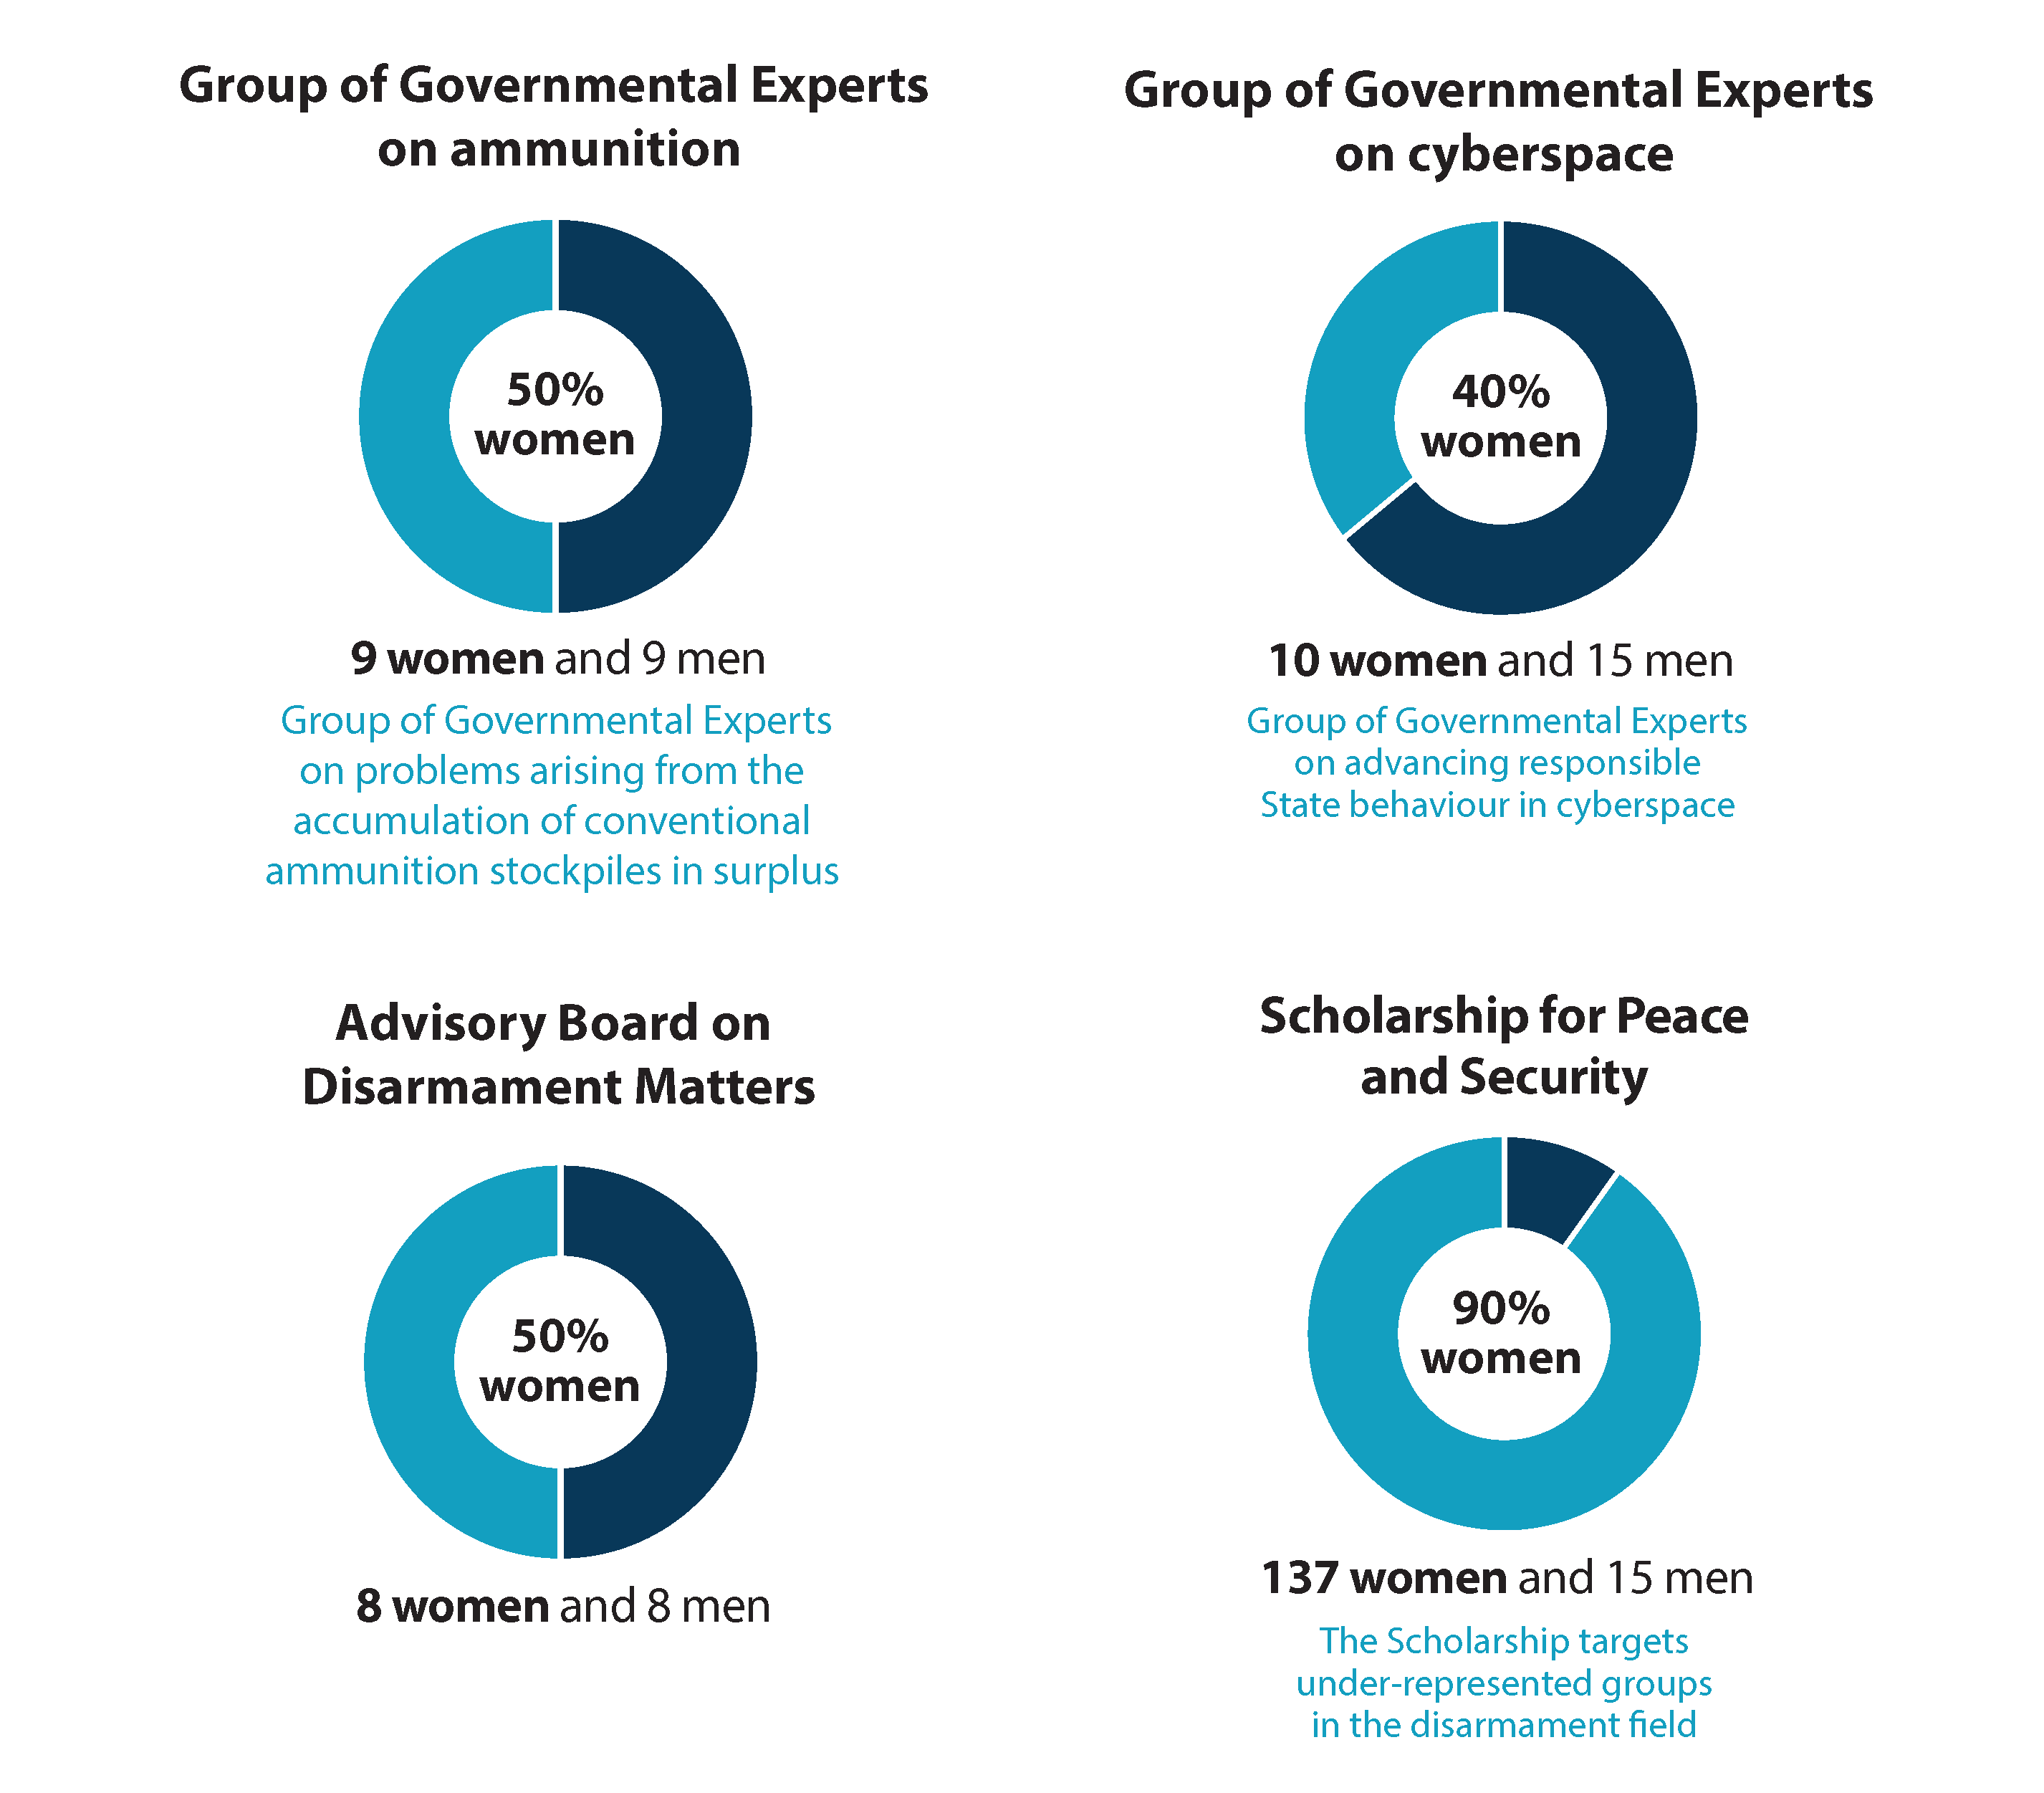 Pie/donut charts showing percentages of women in the Group of Governmental Experts on ammunition, the Group of Governmental Experts on cyberspace, the Advisory Board on Disarmament Matters and the Scholarship for Peace and Security.